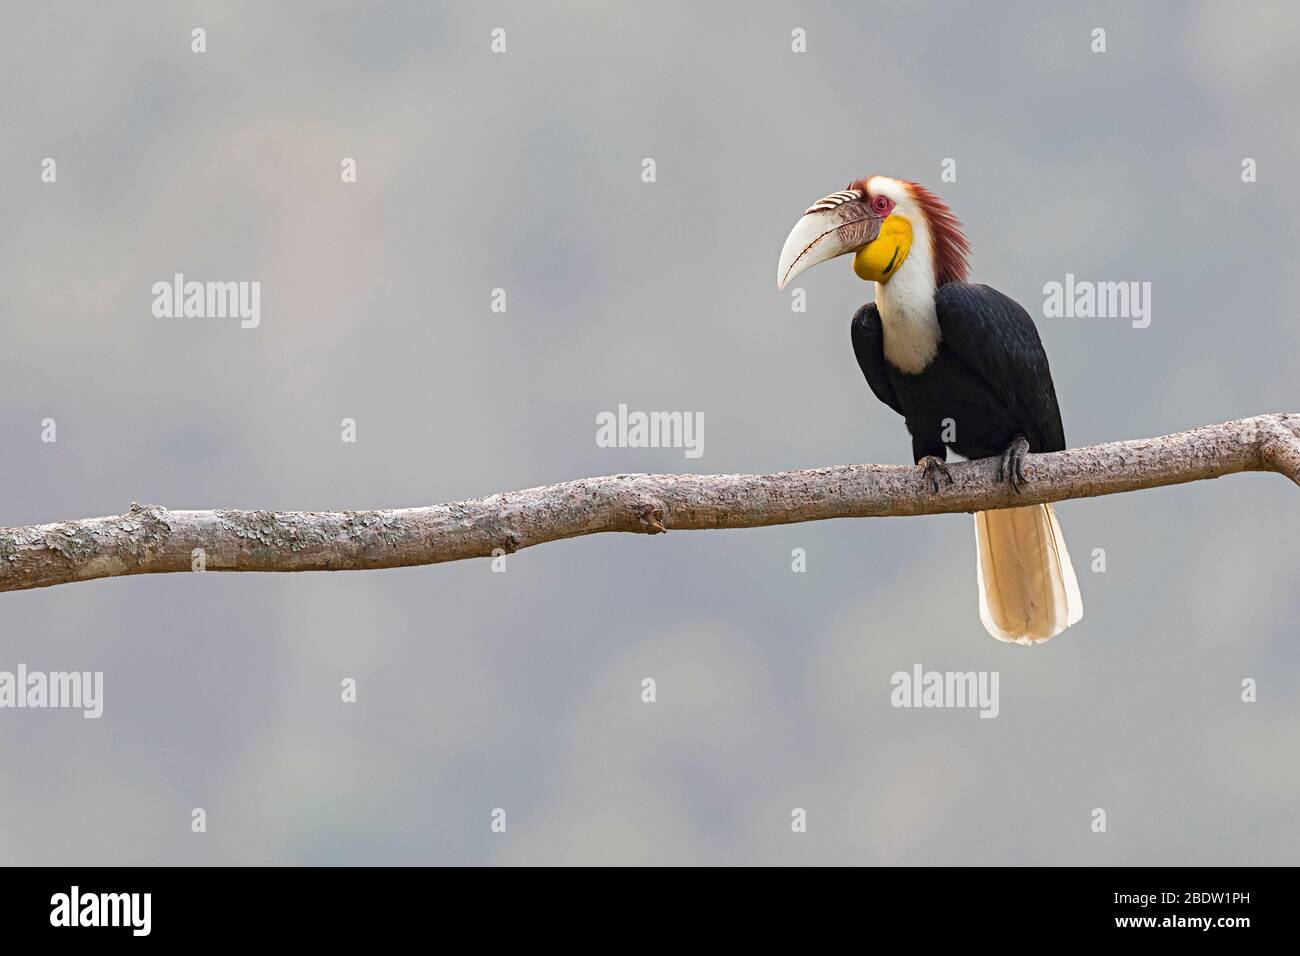 A adult male Wreathed Hornbill (Rhyticeros undulatus) in Yunnan, China Stock Photo